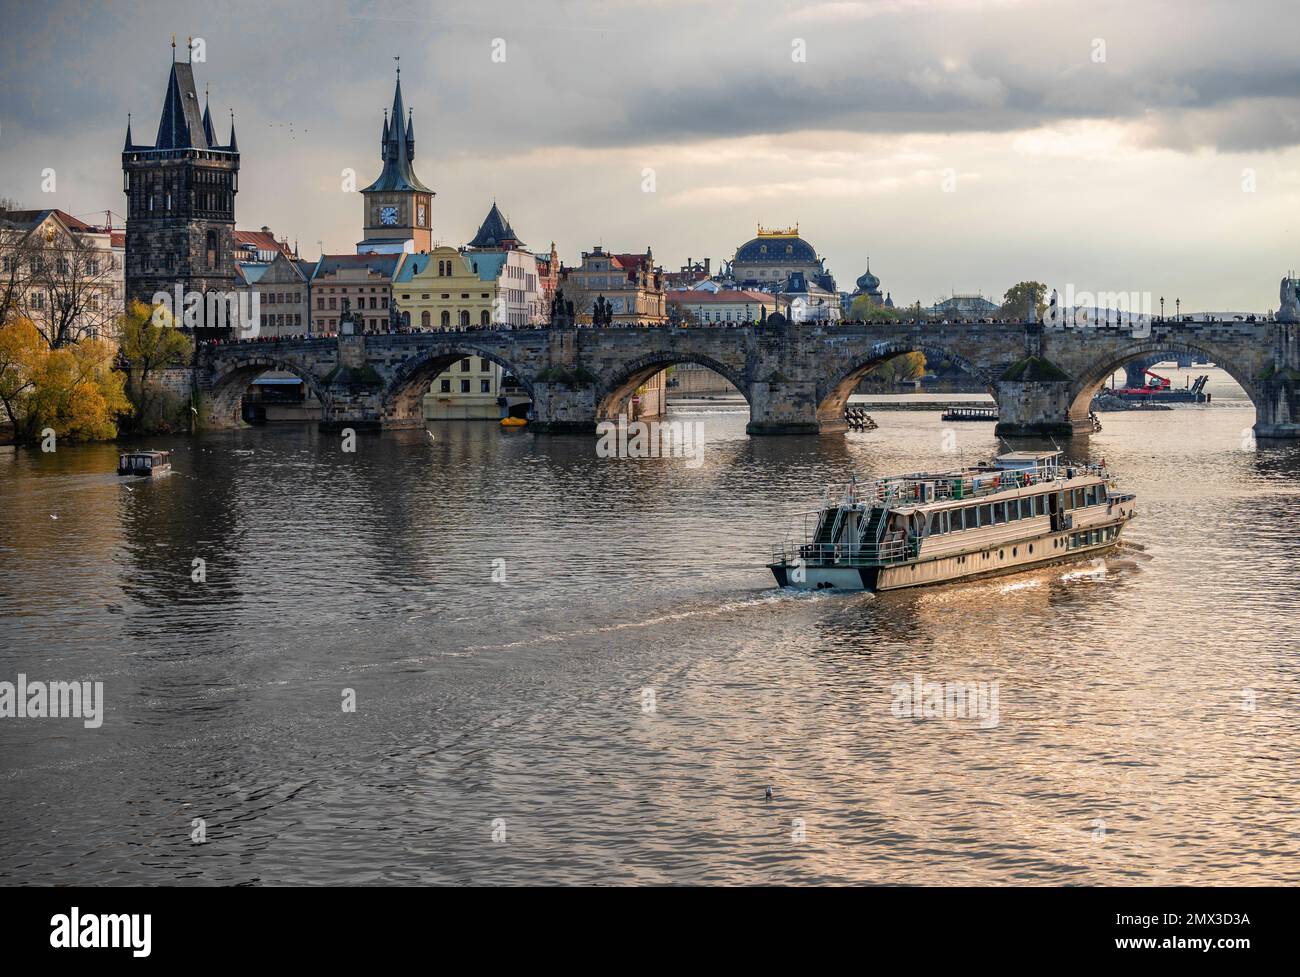 Nice panorama of medieval tower, building, church and Charles bridge, river Vltava with boat. Czech republic, Prague. Nice lighting. Stock Photo